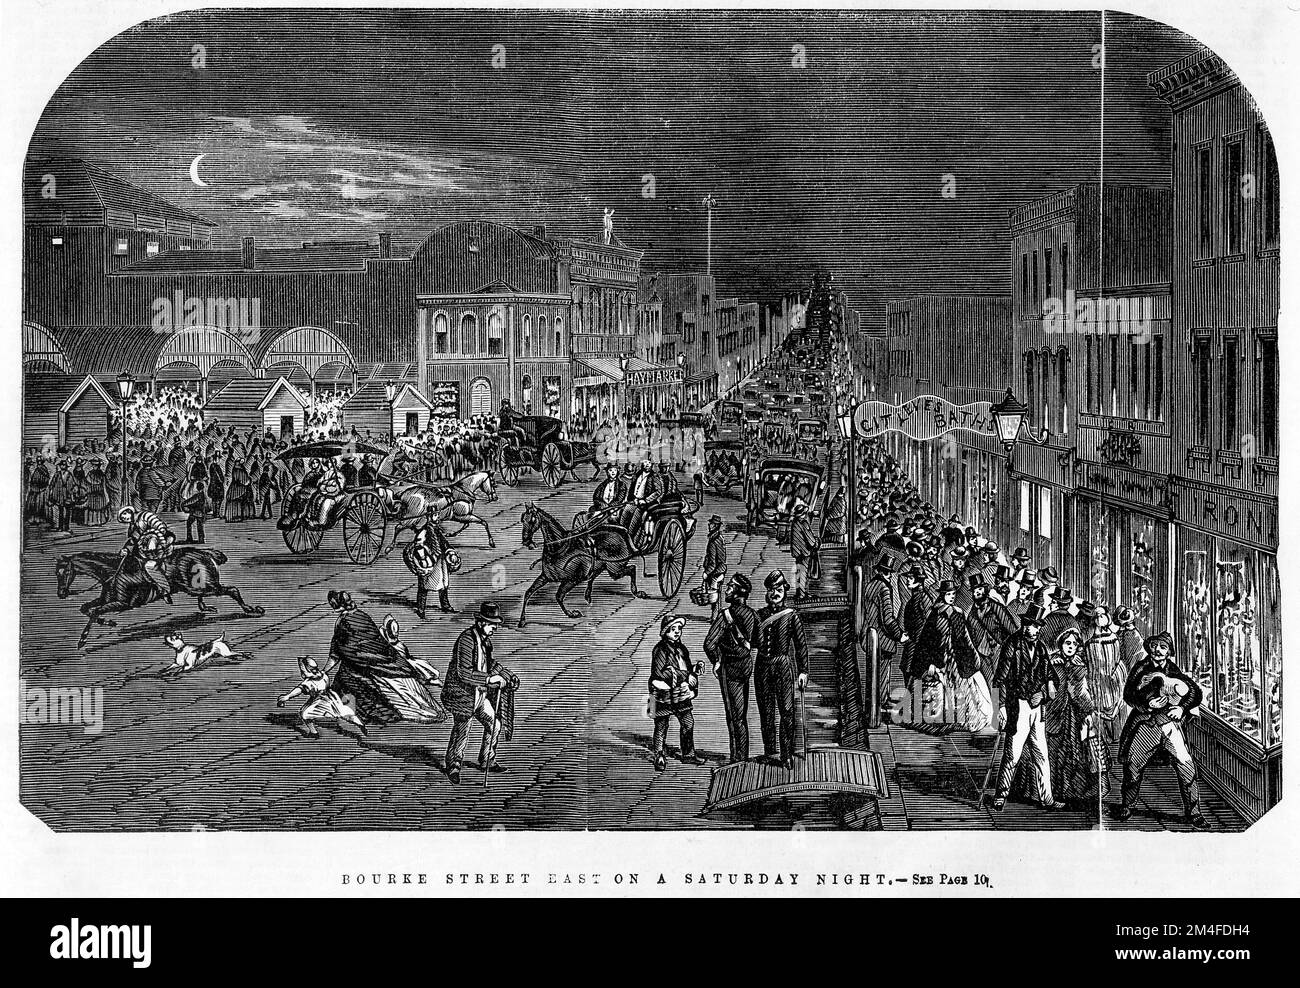 Bourke Street East in Melbourne On A Saturday Night in 1863. Shows a very crowded Bourke Street, with carriages and families. Stock Photo